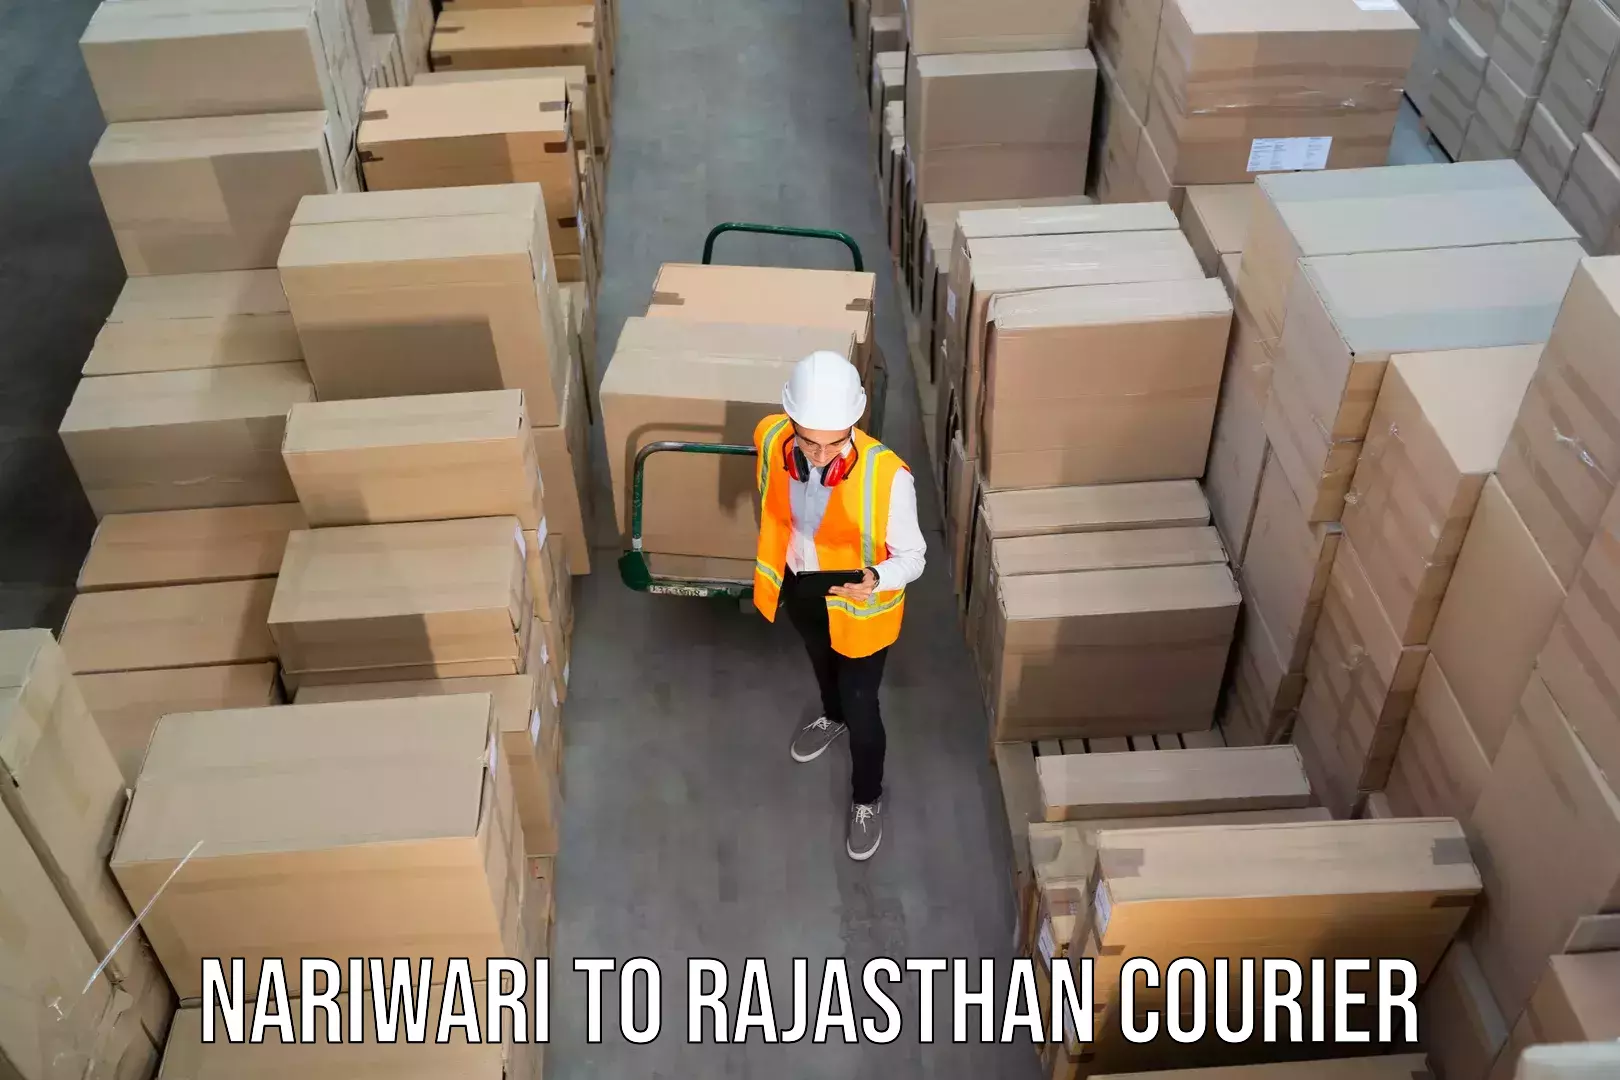 Reliable delivery network Nariwari to Rajasthan